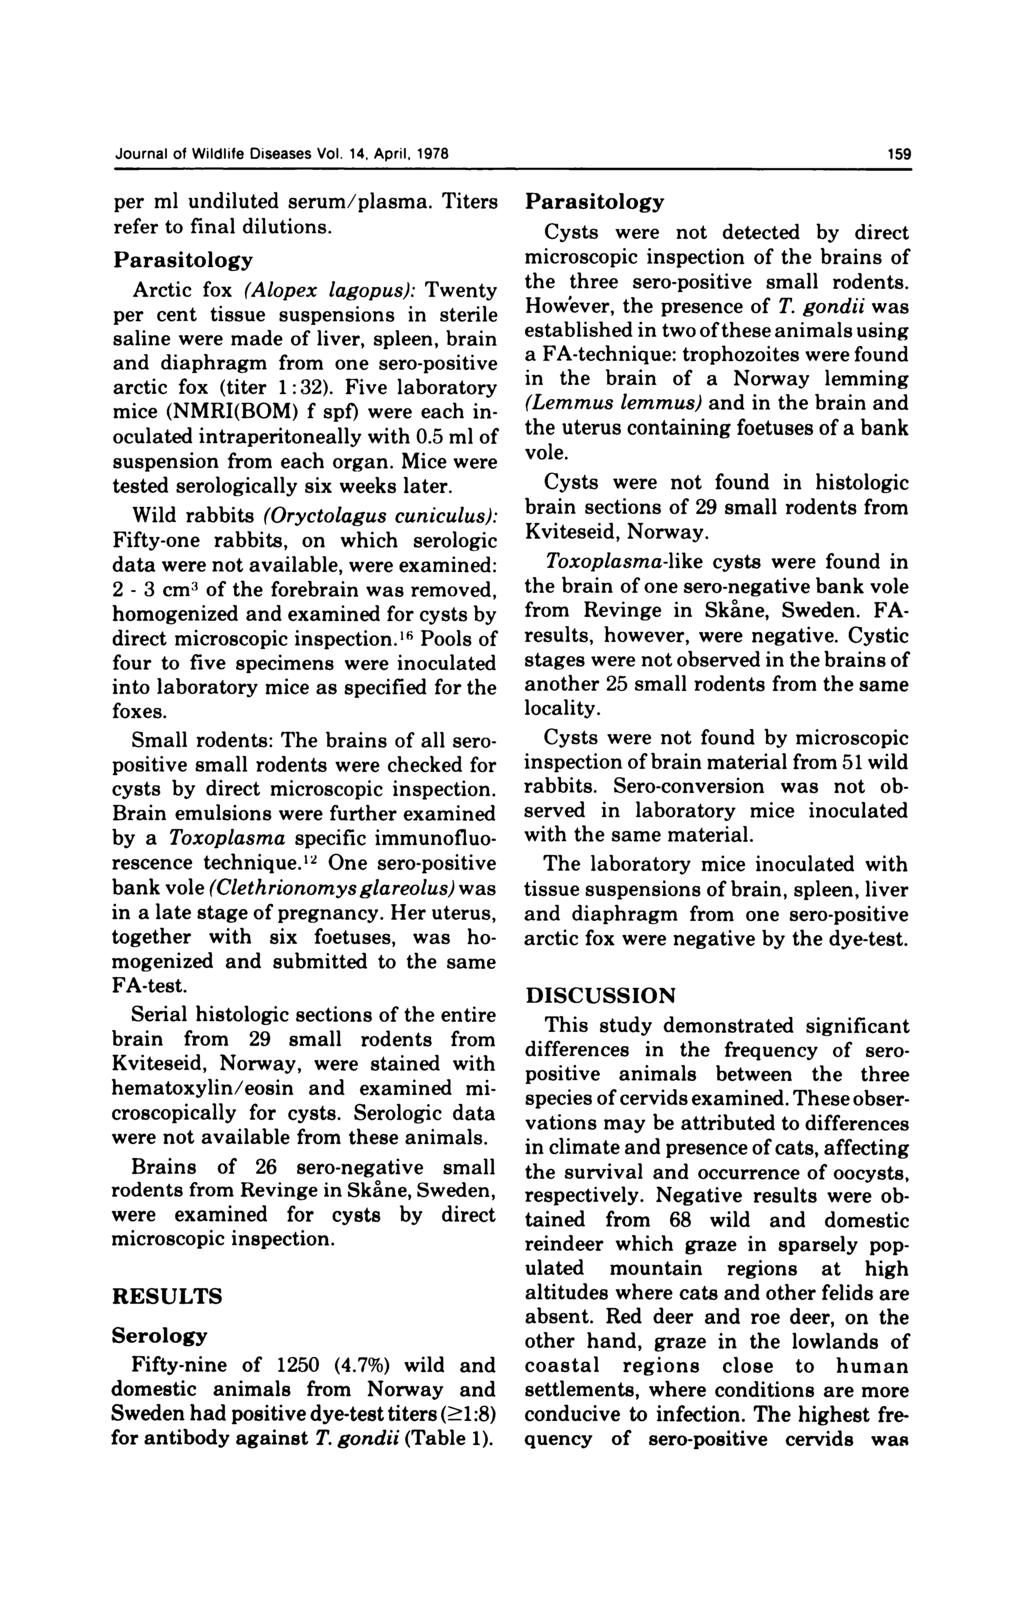 Journal of Wildlife Diseases Vol. 14, April, 1978 159 per ml undiluted serum/plasma. Titers refer to final dilutions.